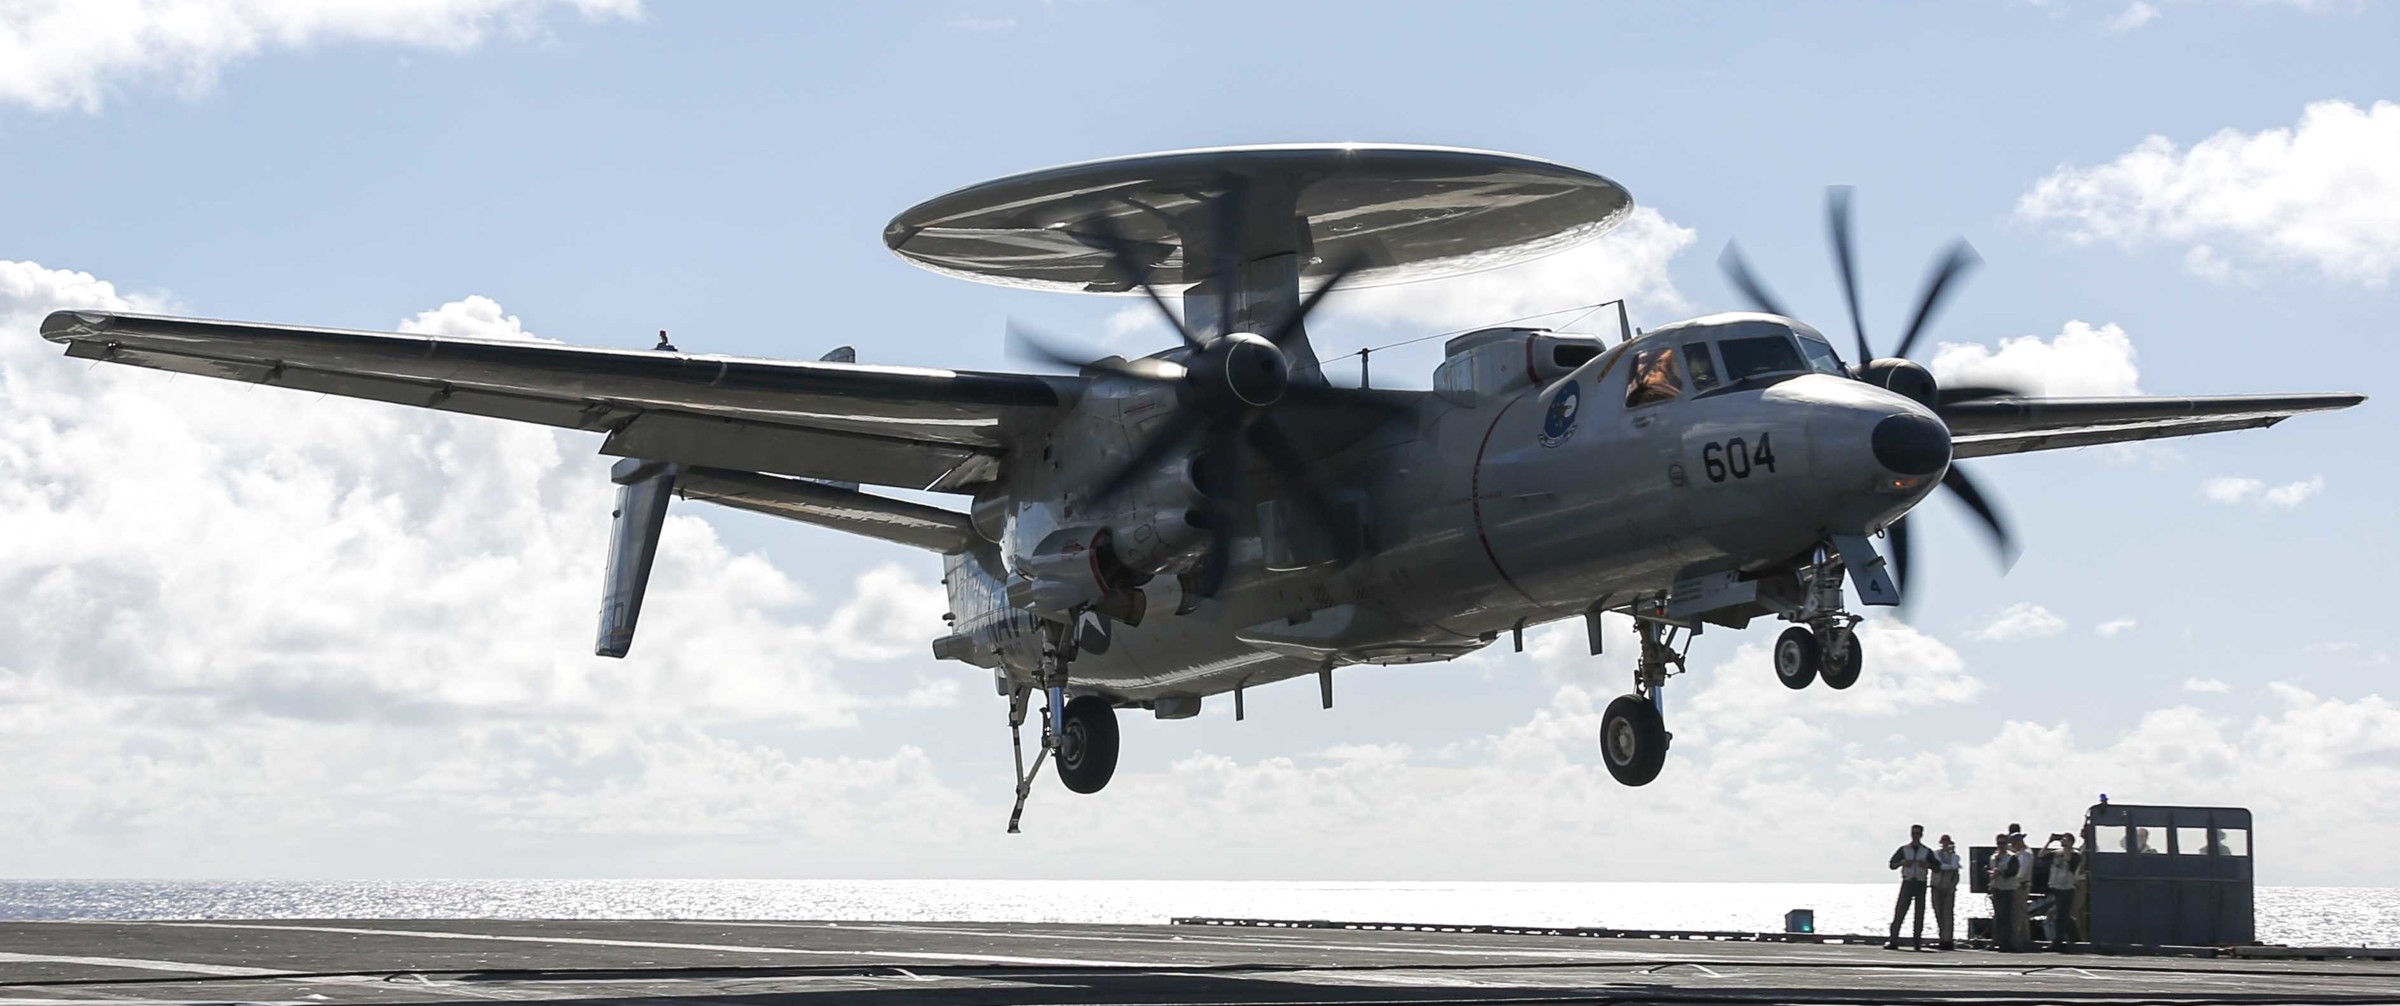 vaw-117 wallbangers airborne command and control squadron navy e-2d hawkeye cvw-9 uss abraham lincoln cvn-72 04